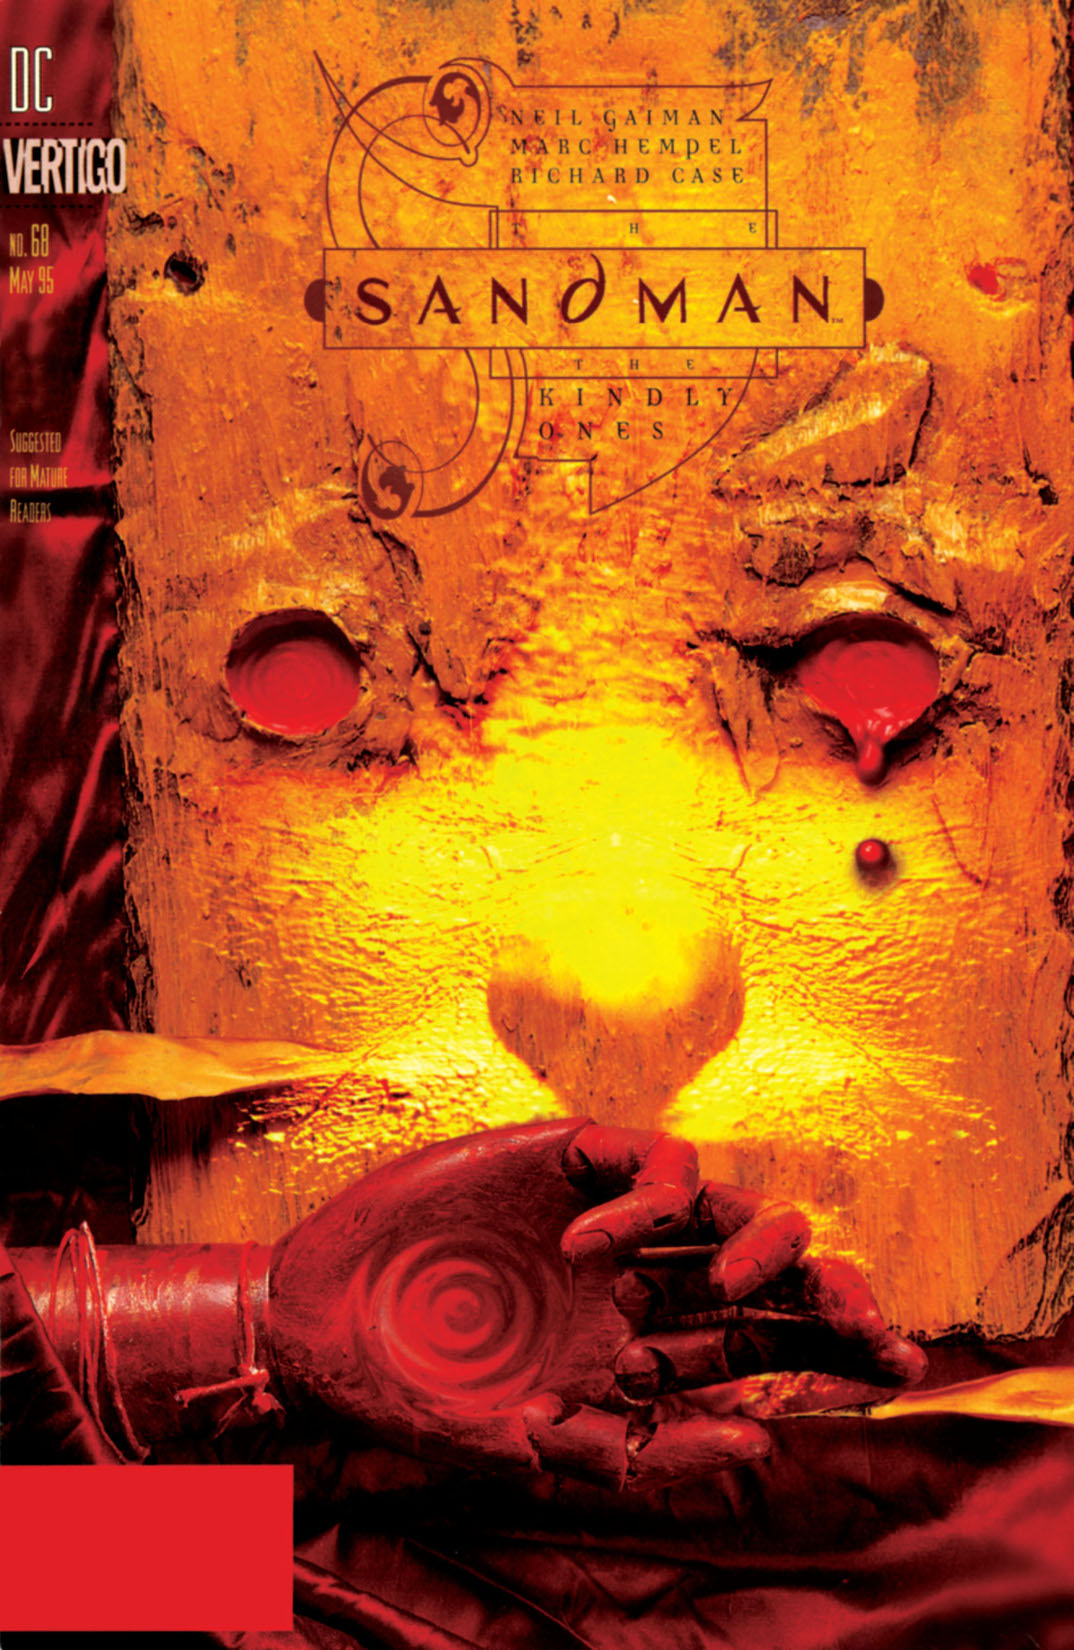 The Sandman #68 preview images